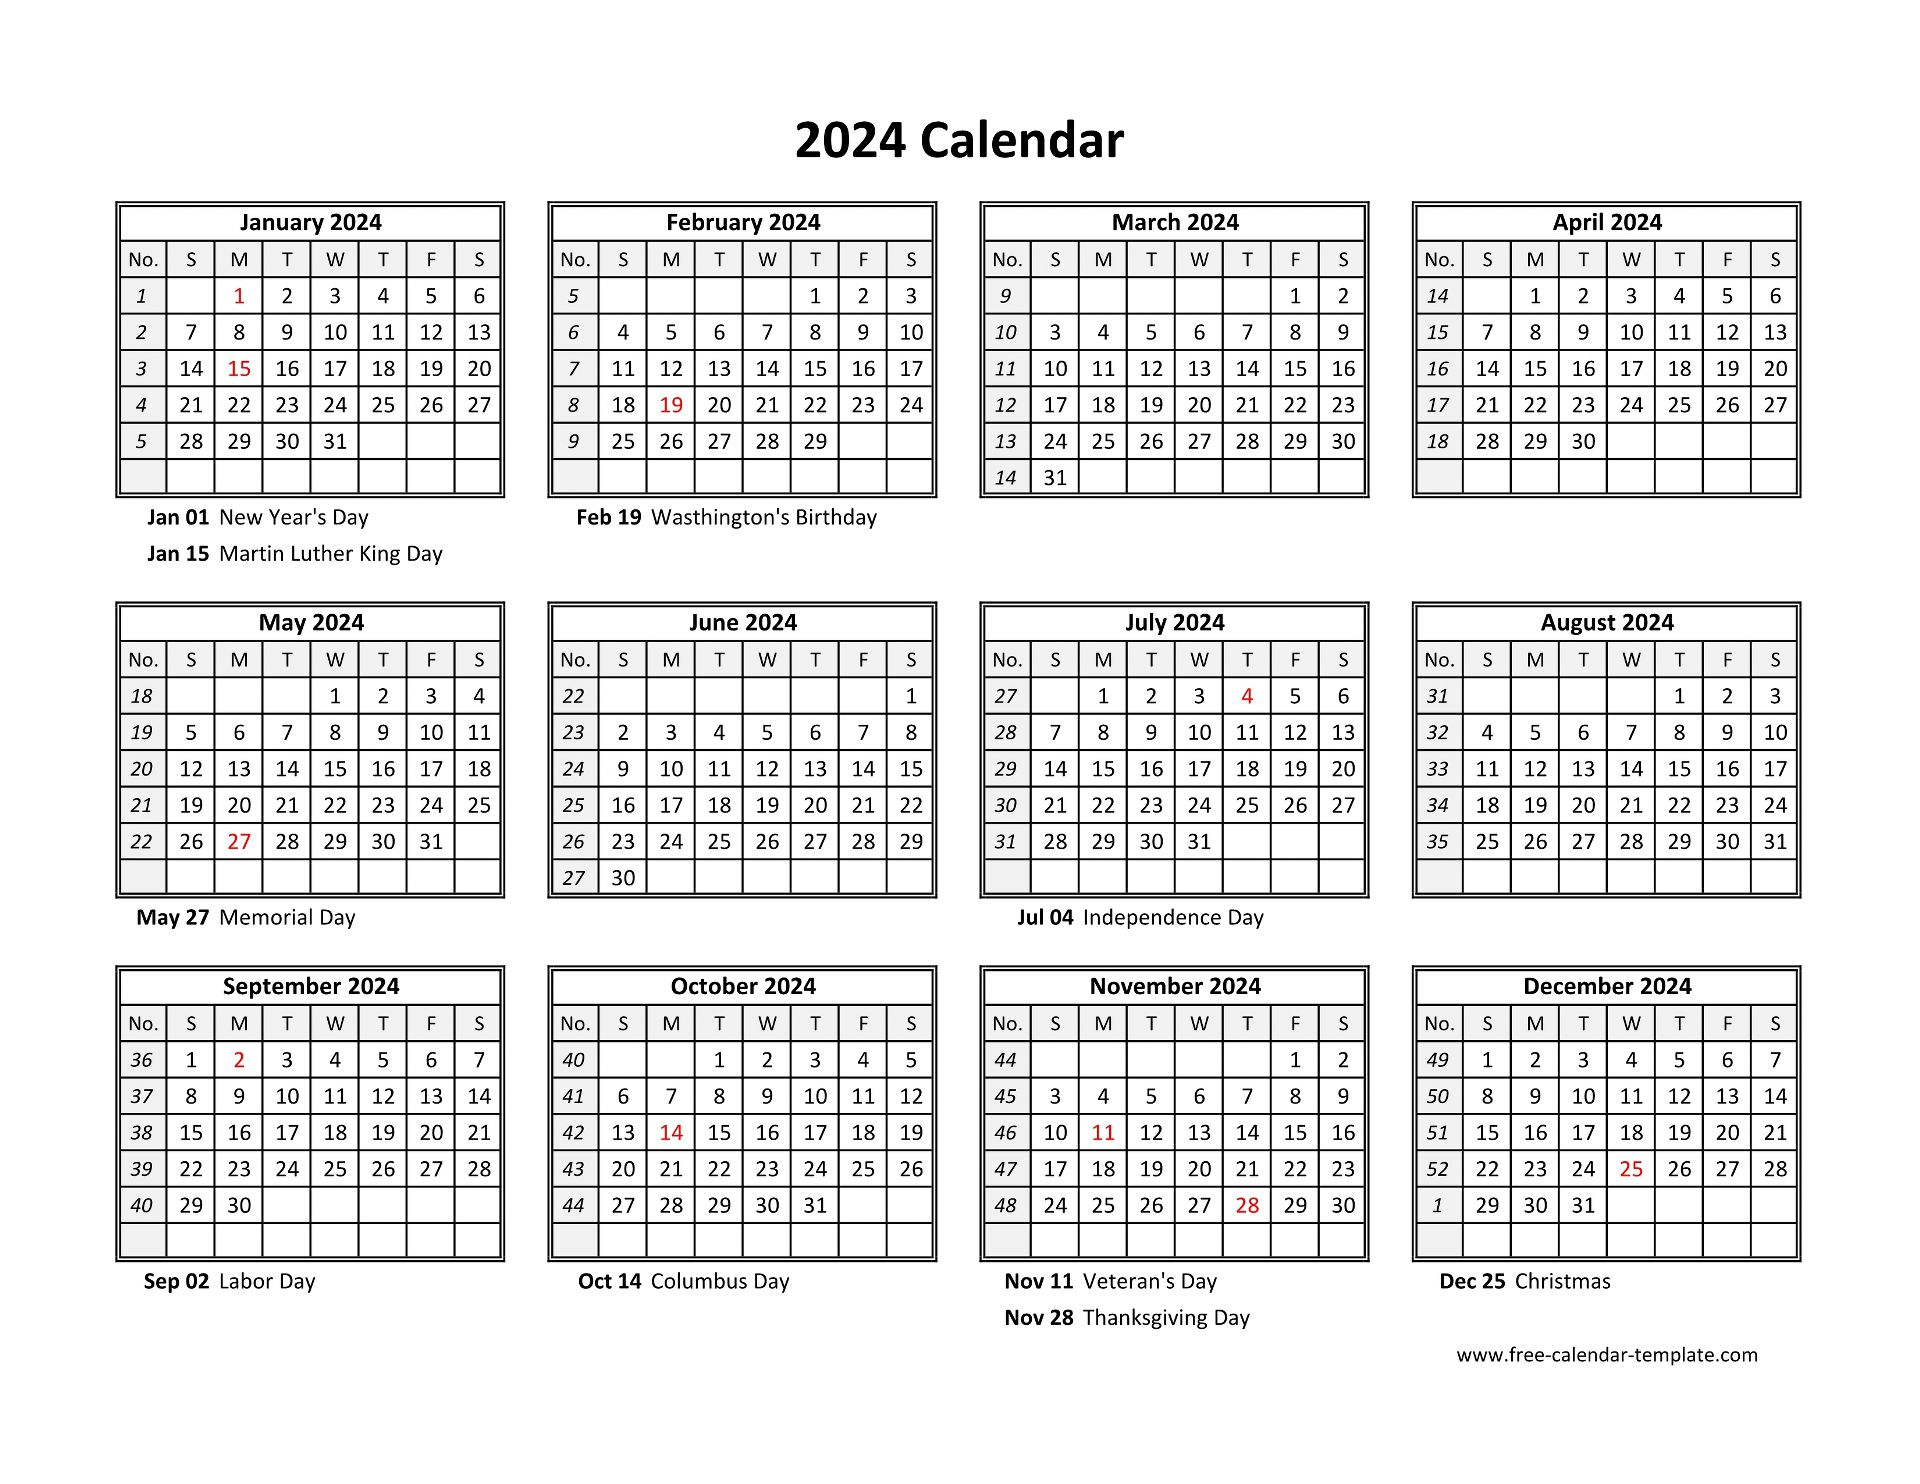 Yearly Calendar 2024 Printable With Federal Holidays | Free | 2024 Calendar Download